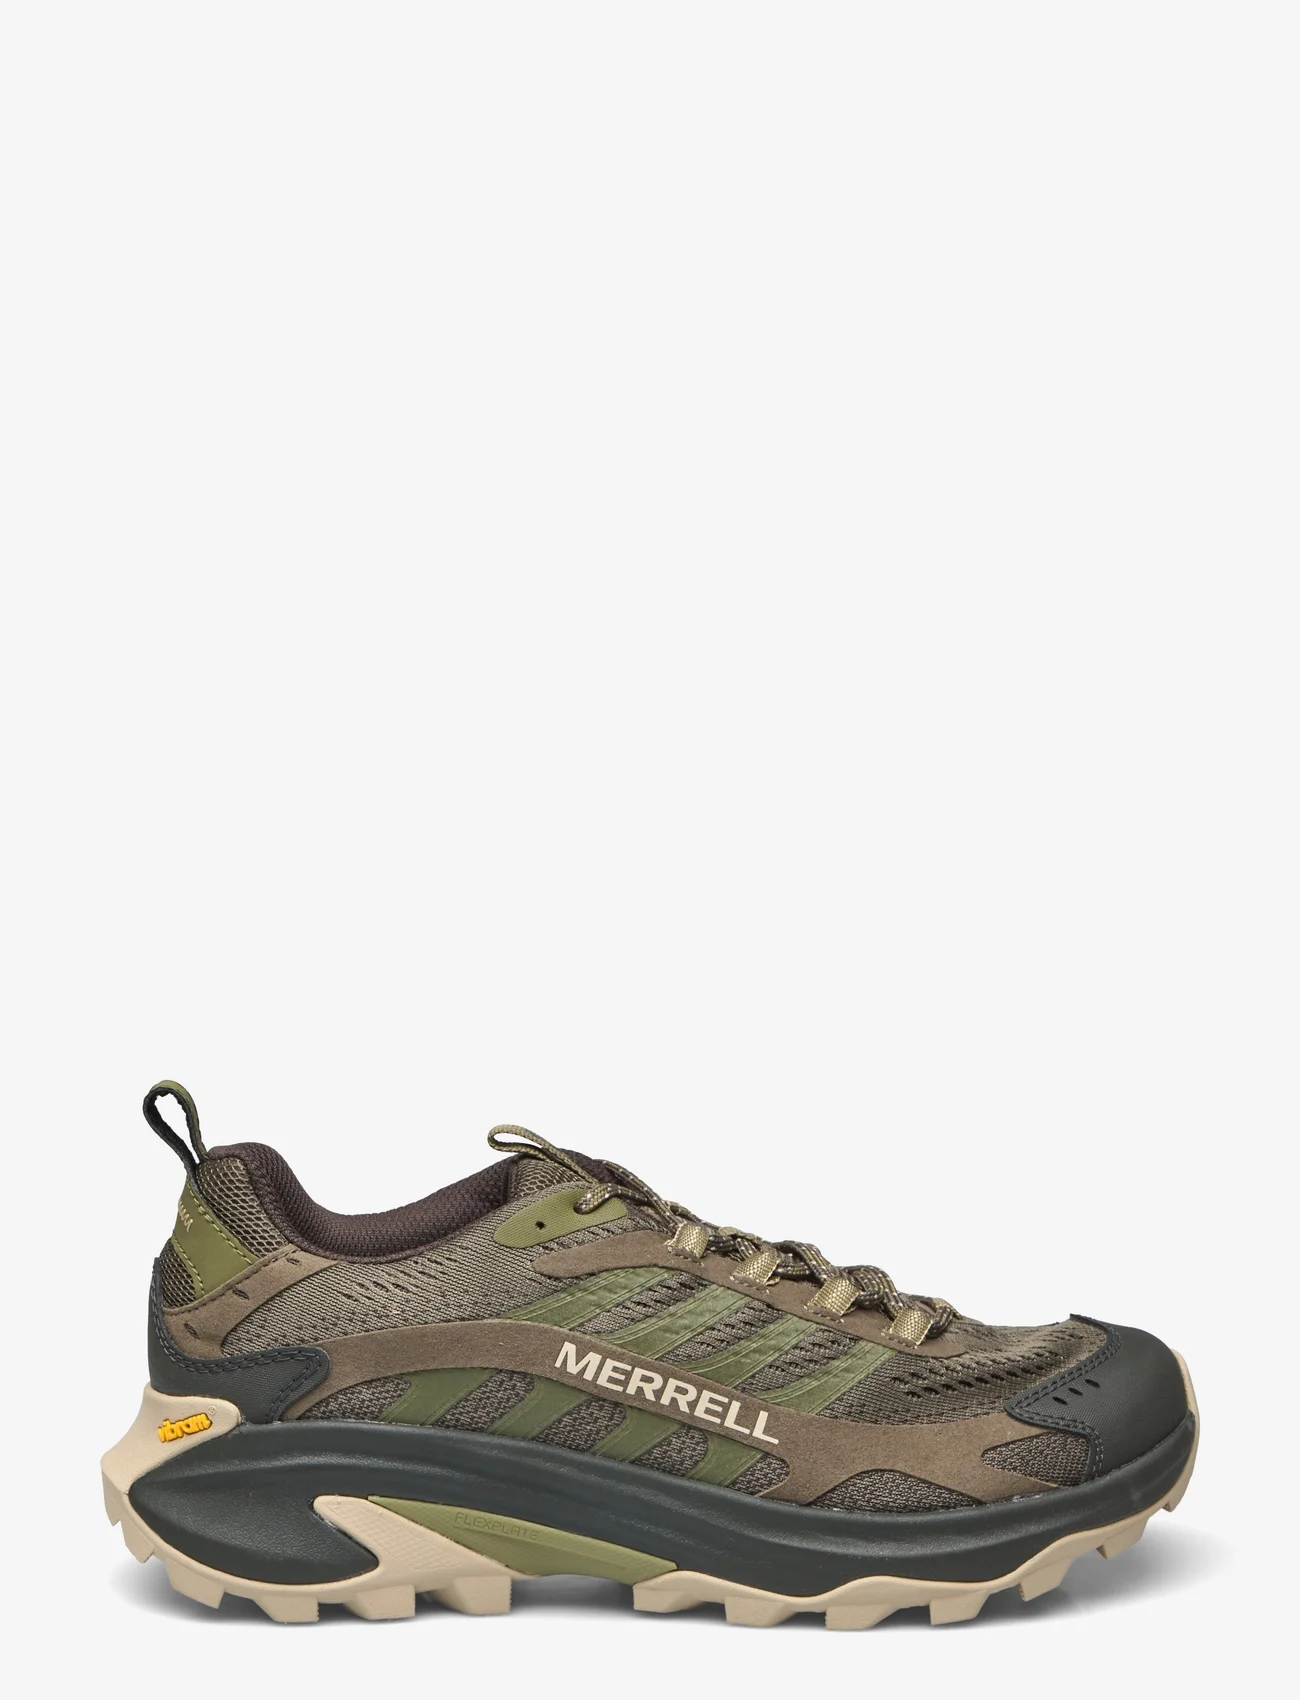 Merrell - Men's Moab Speed 2 - Olive - hiking shoes - olive - 1